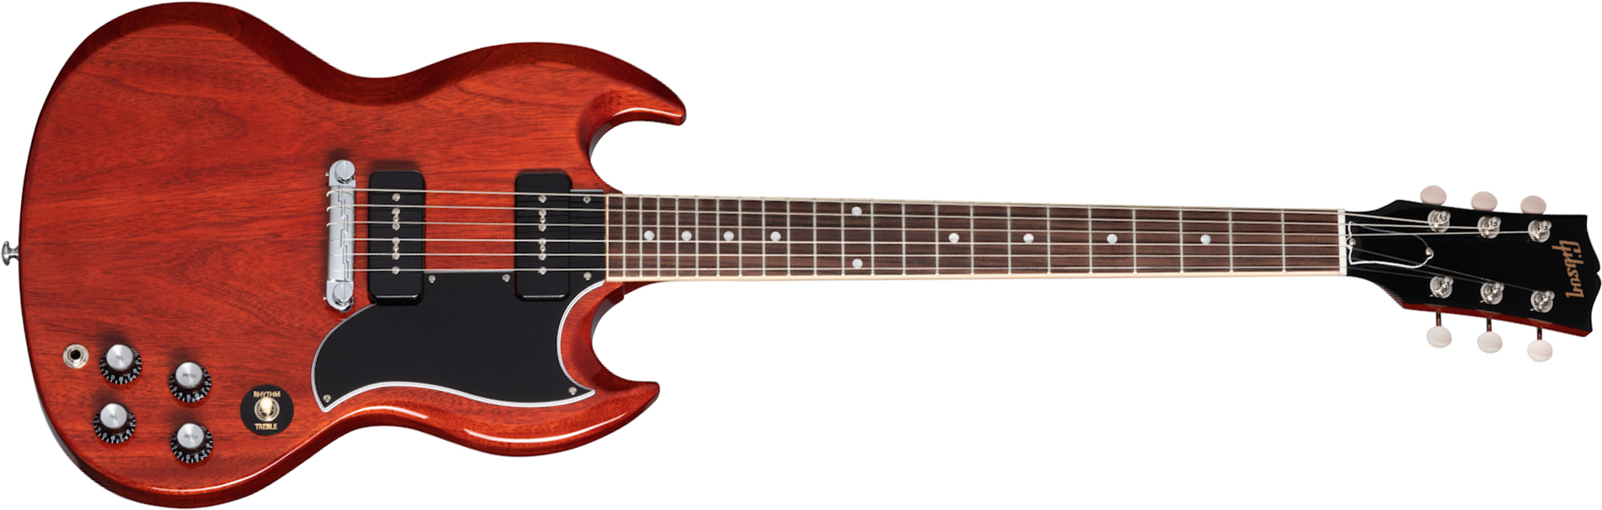 Gibson Sg Special Original 2021 2p90 Ht Rw - Vintage Cherry - Double cut electric guitar - Main picture